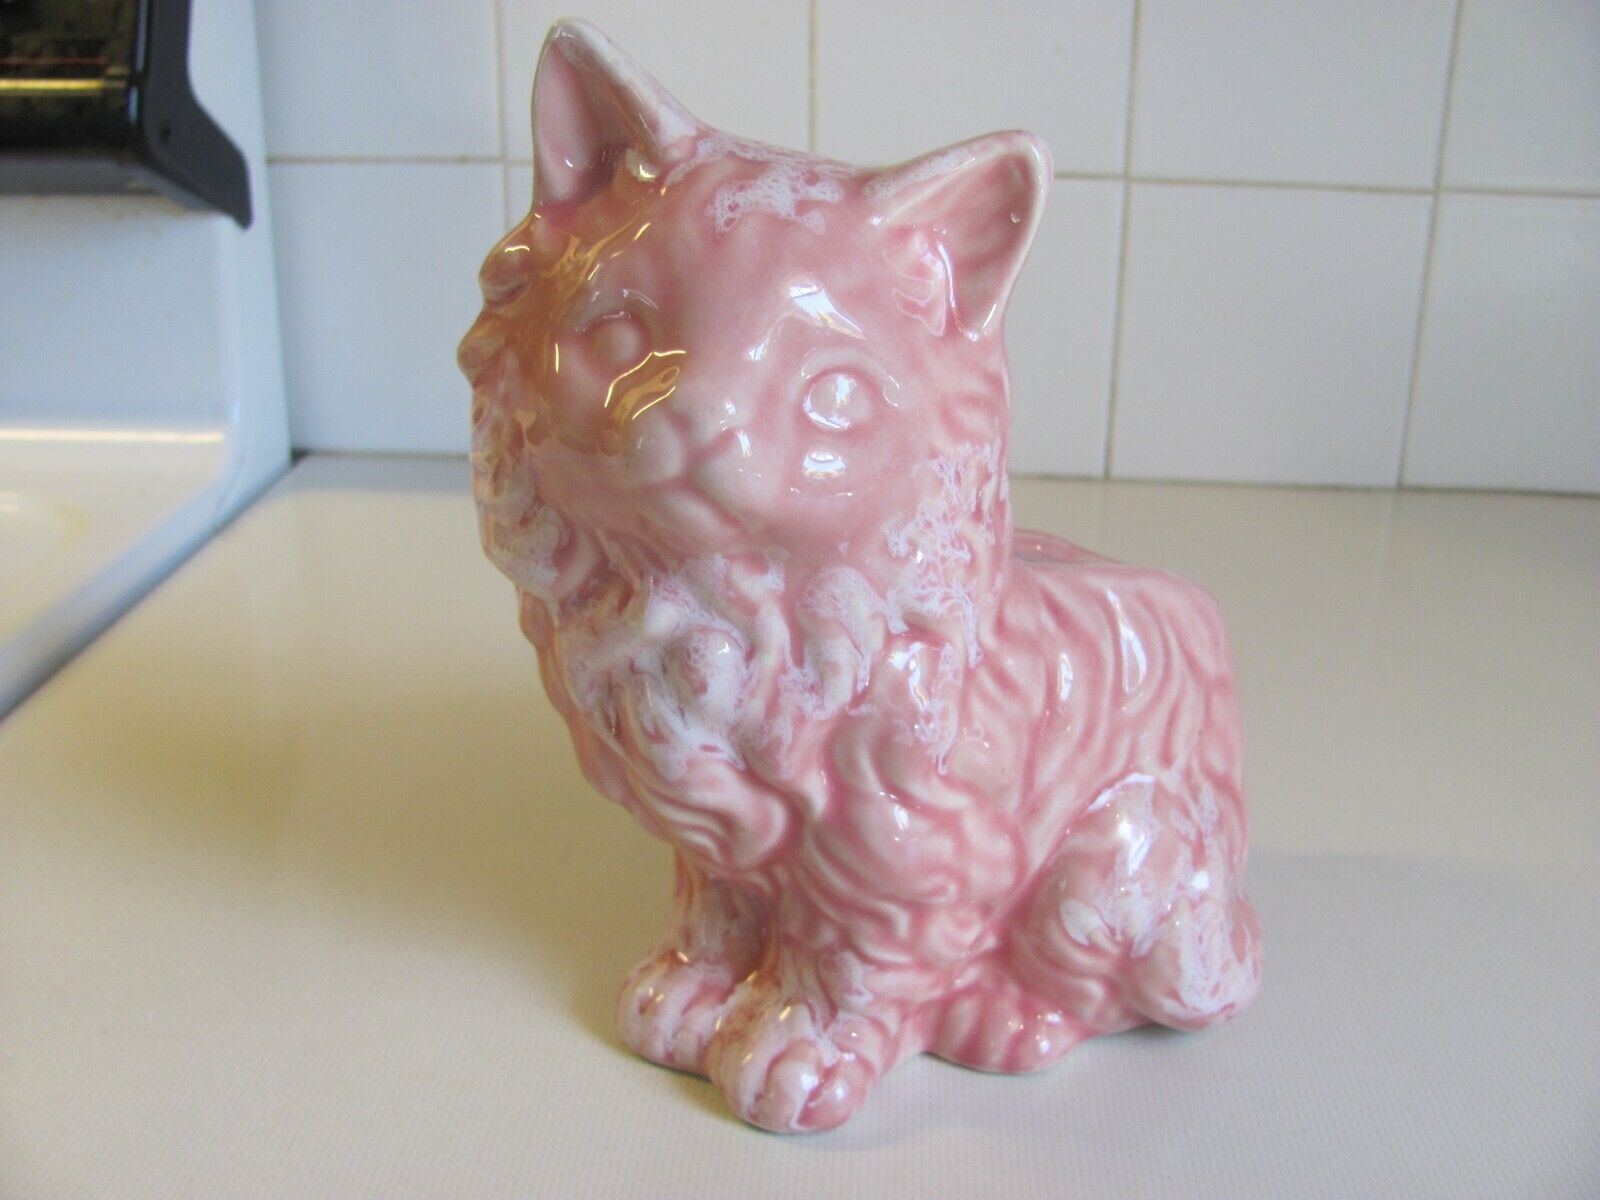 Vintage Pink Cat Planter with White Lacy Overlay Paint